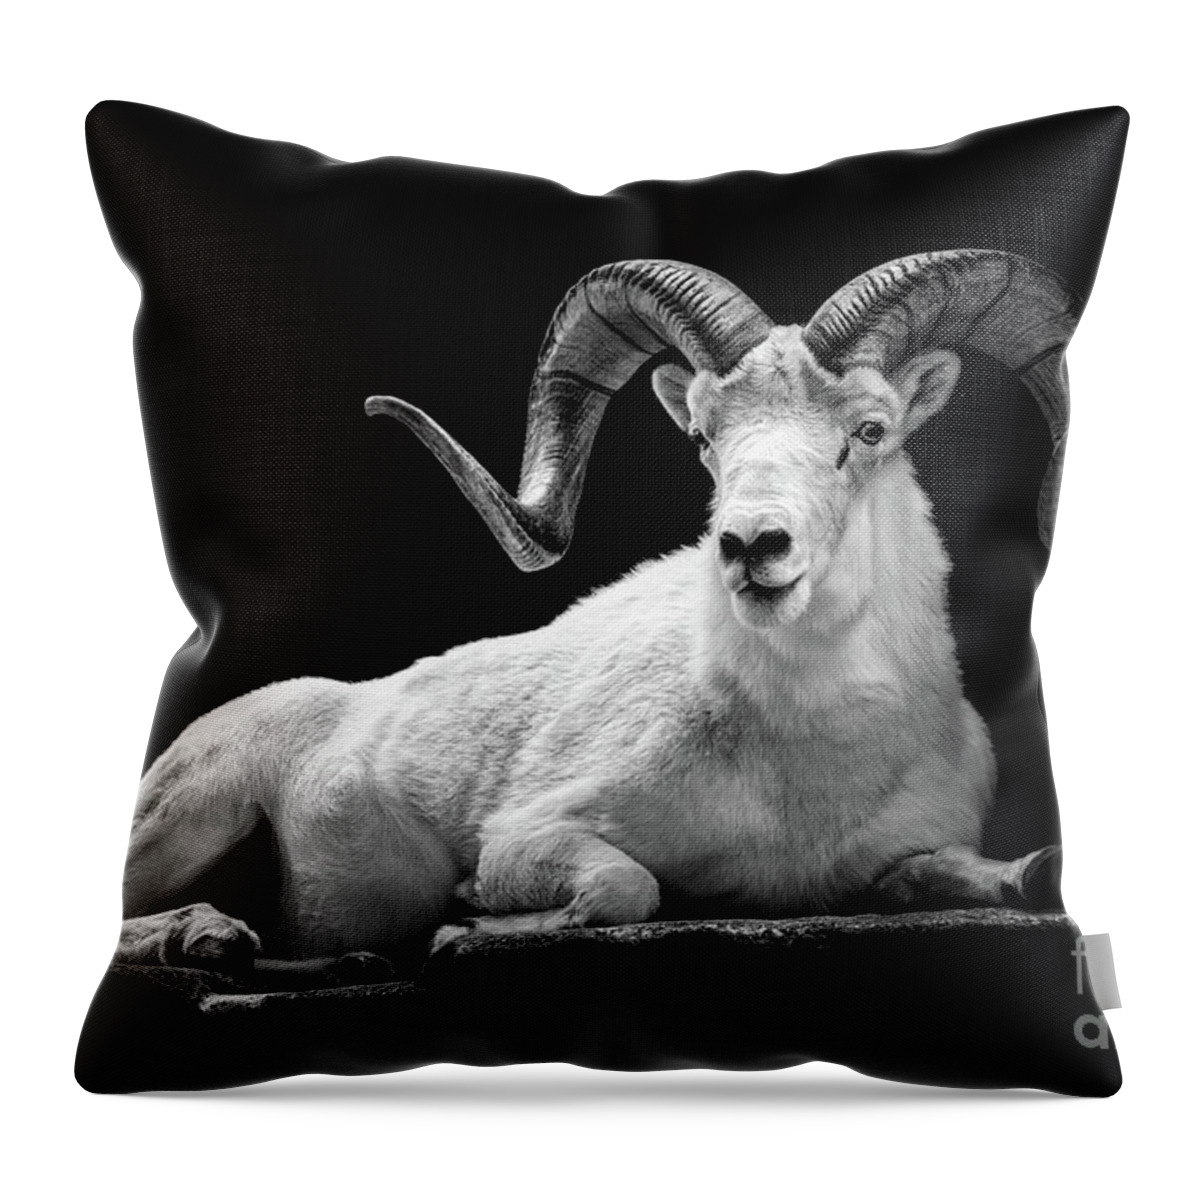 Dall Sheep Throw Pillow featuring the photograph Dall Sheep by Jarrod Erbe